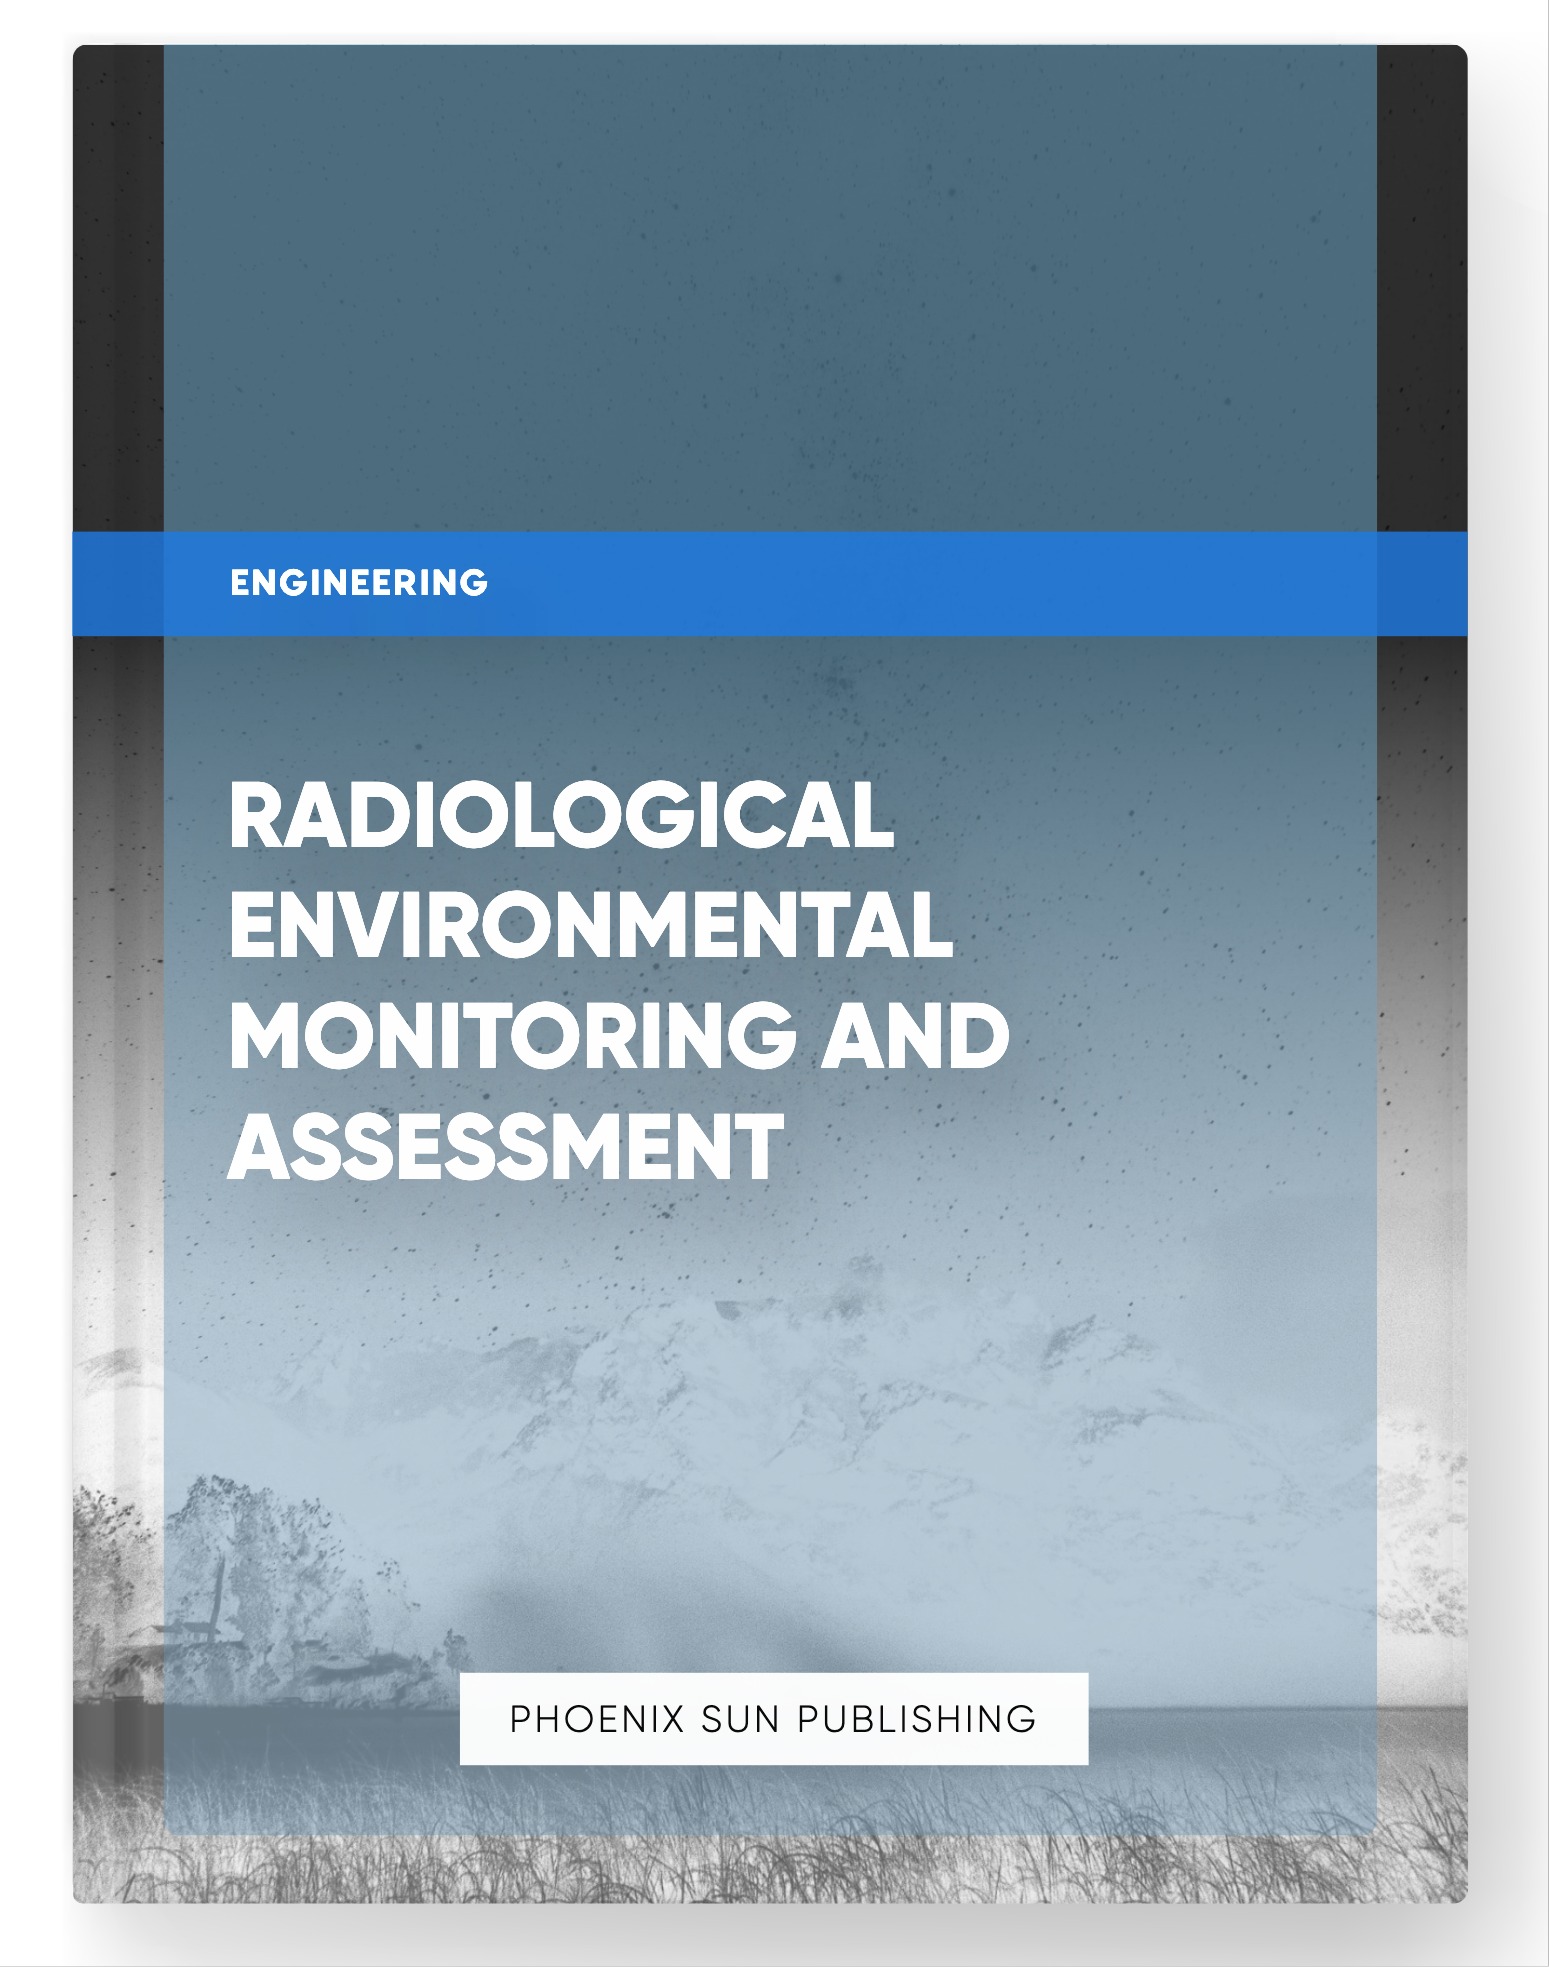 Radiological Environmental Monitoring and Assessment